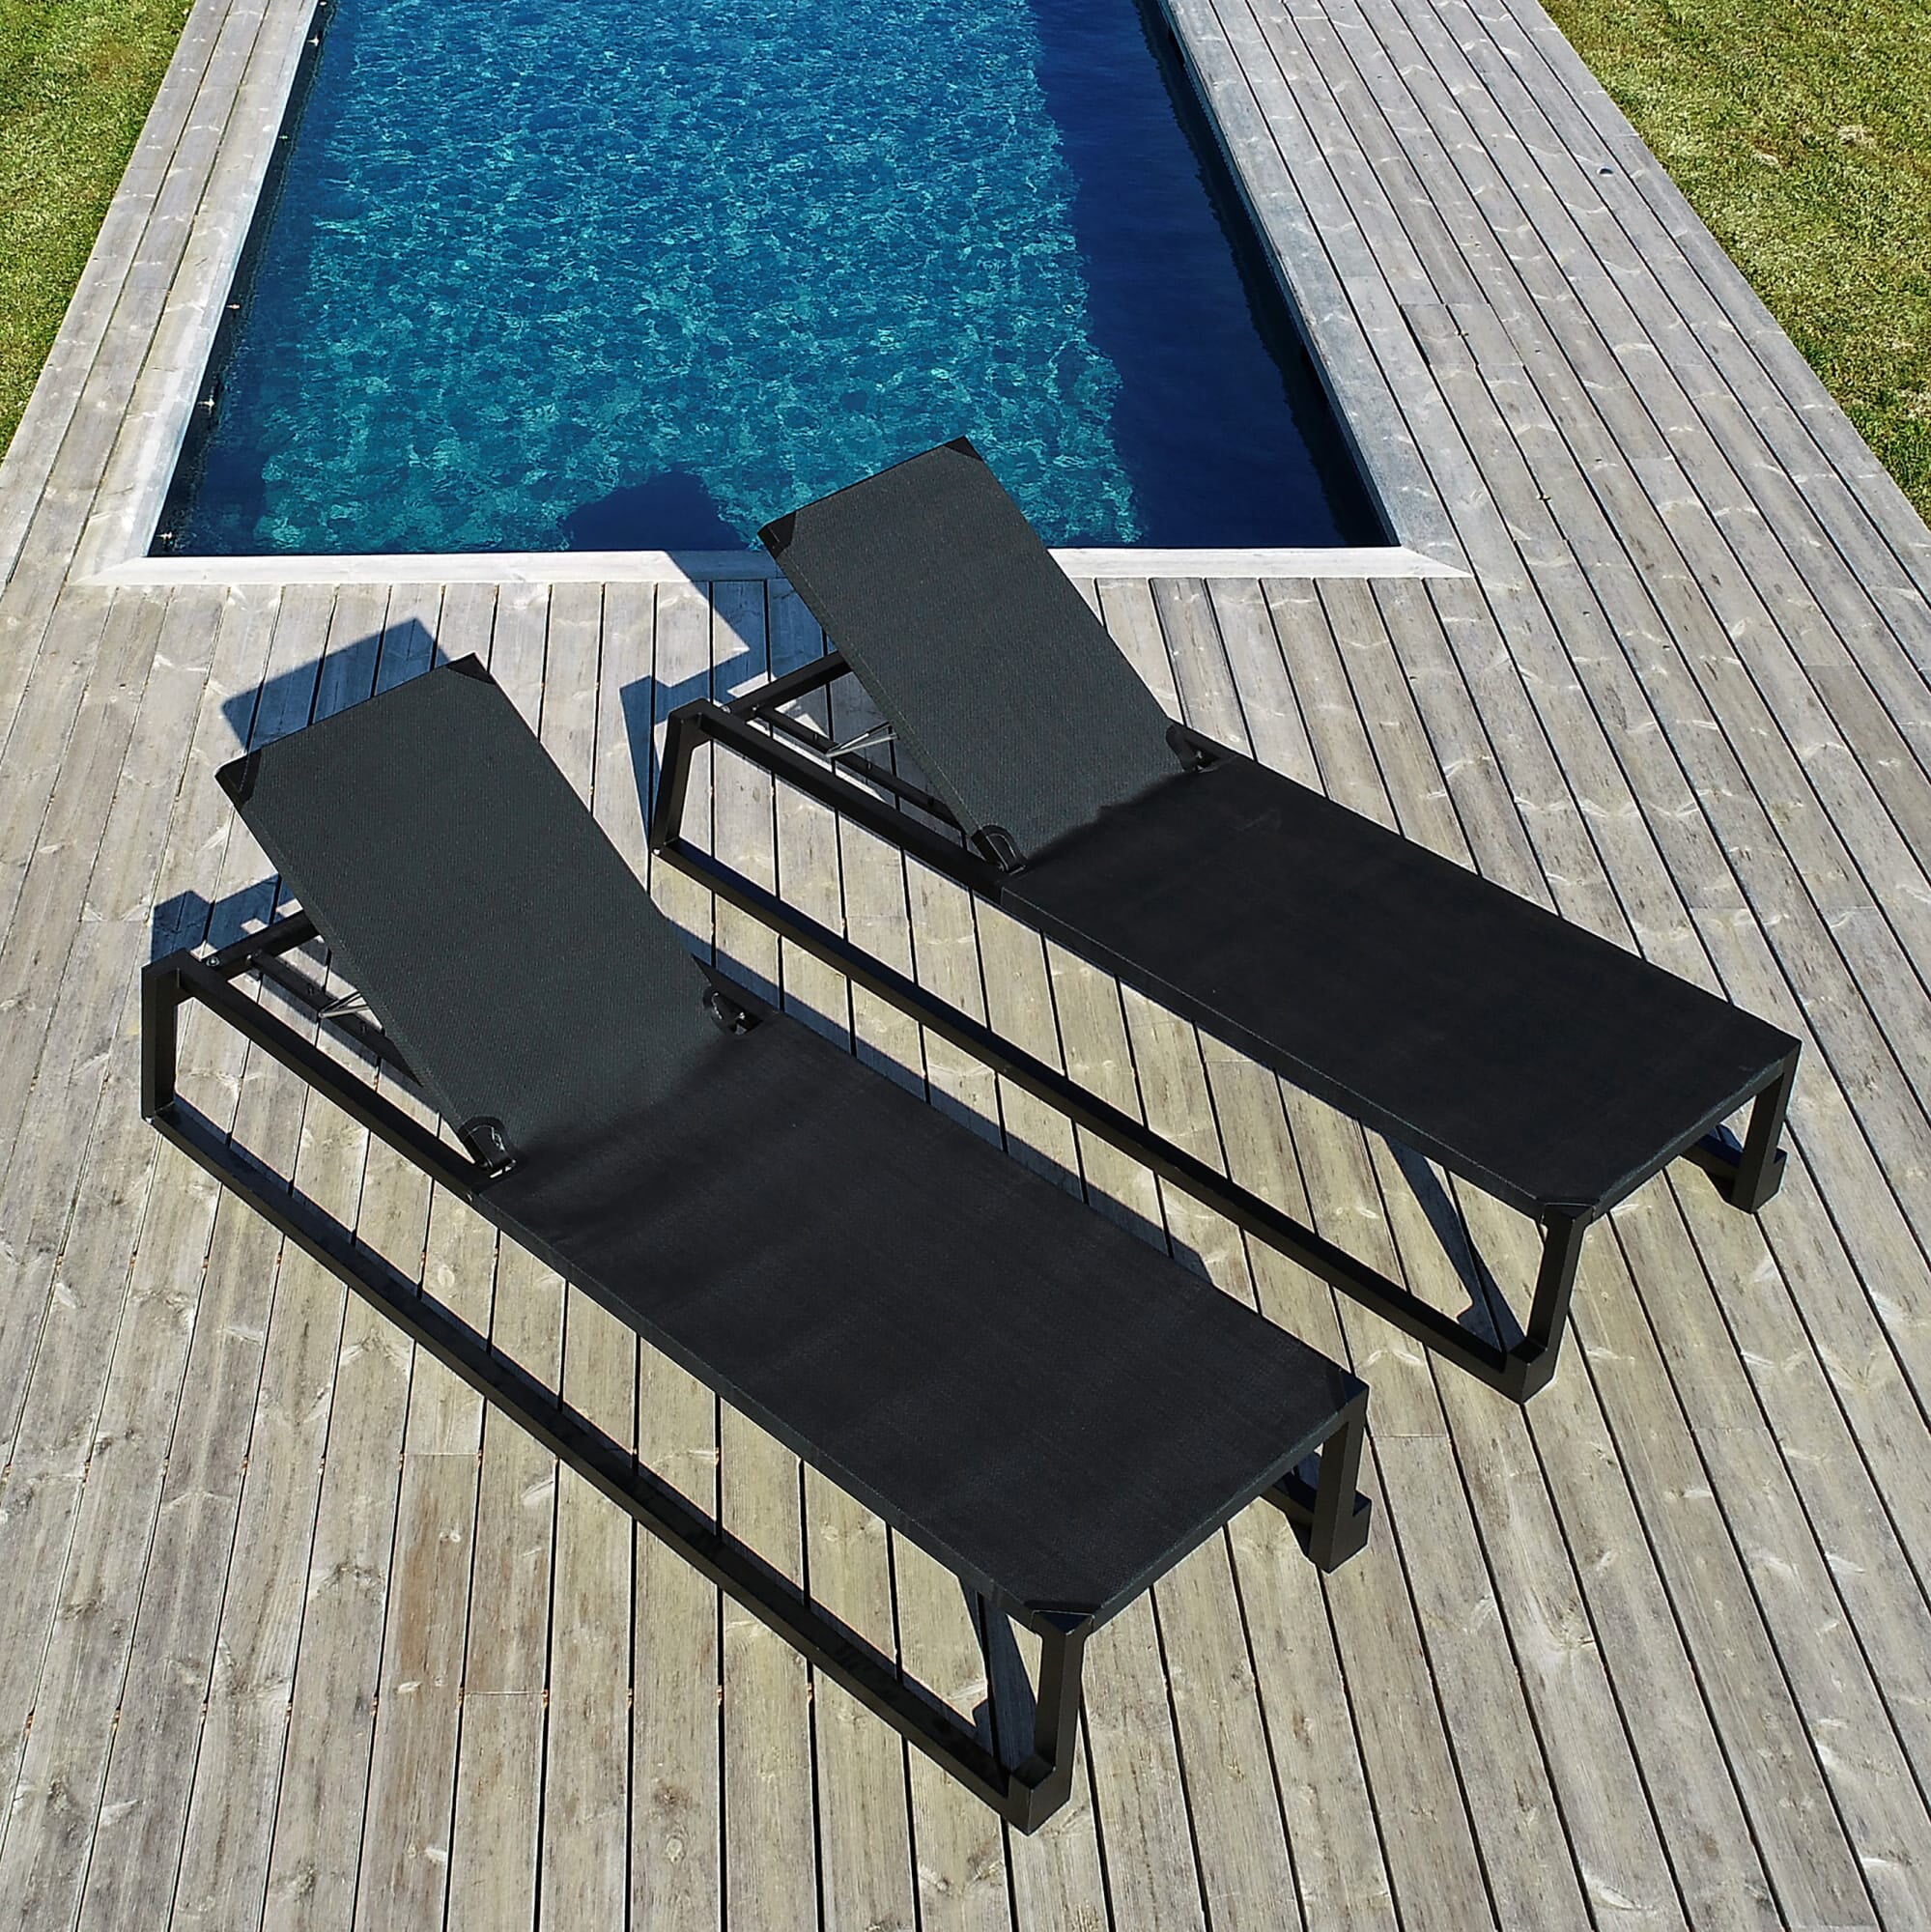 Resol Milano Sunlounger Outdoor White structure - Black